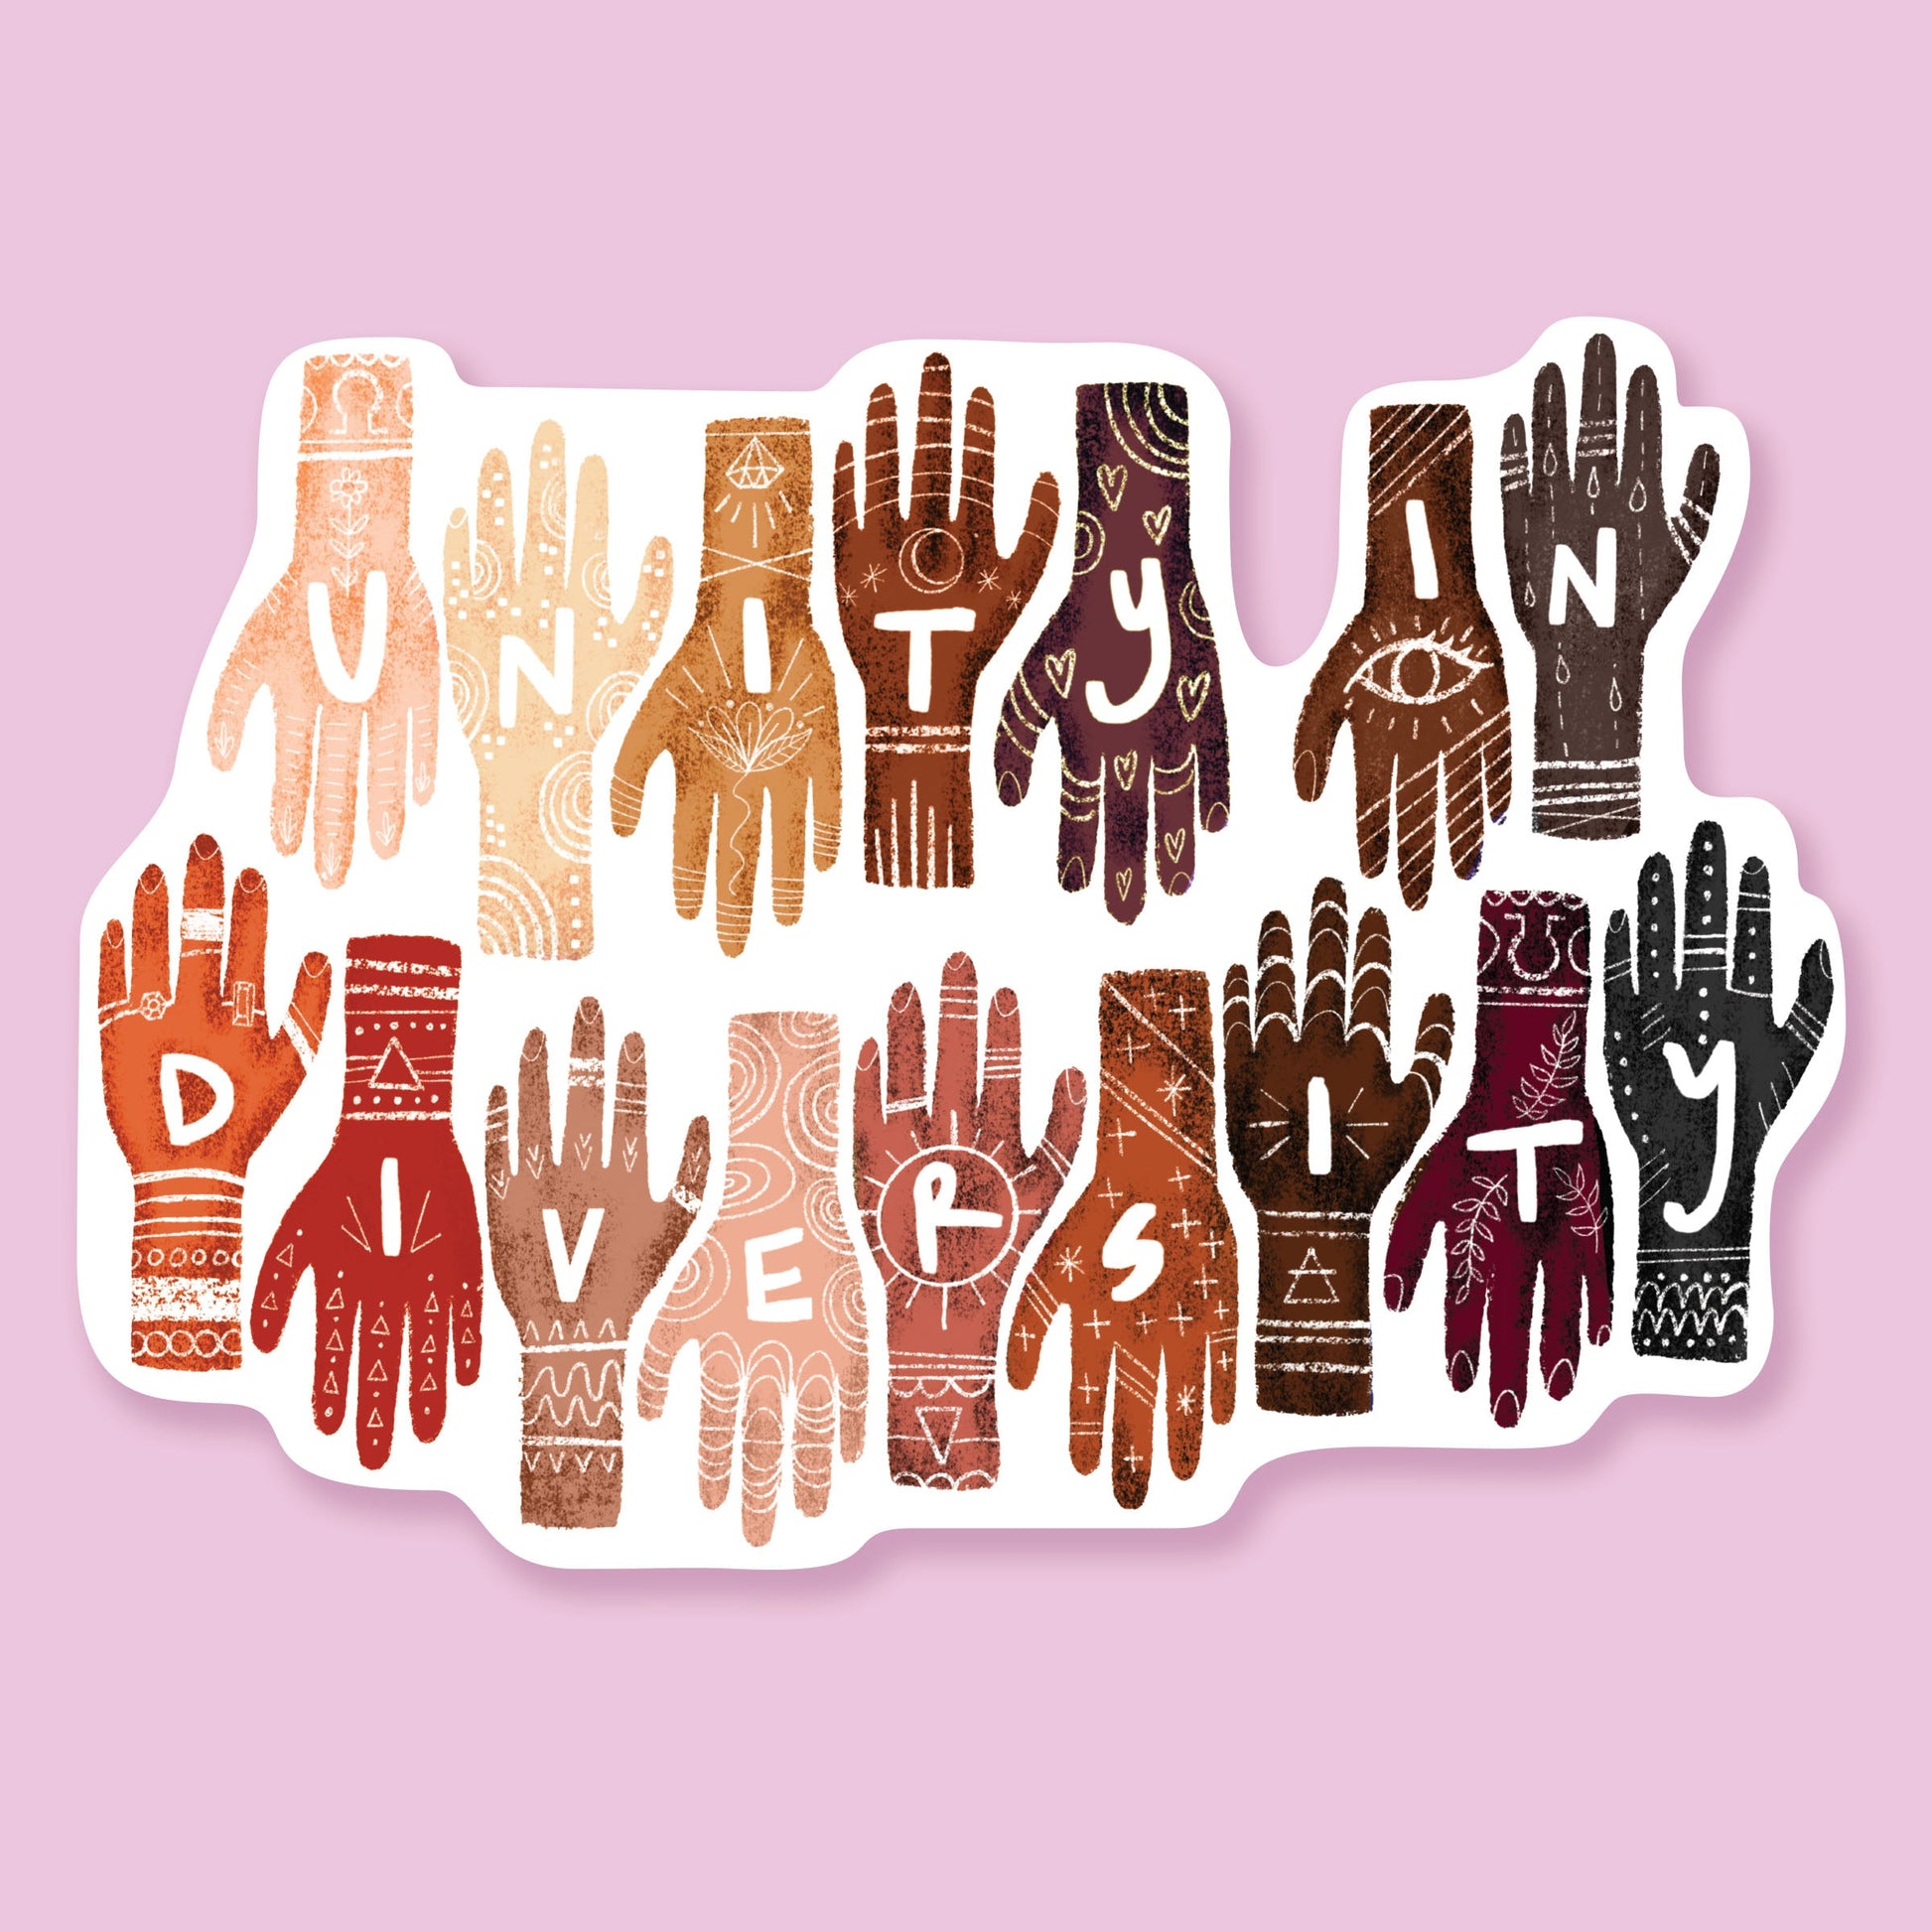 White background sticker with a range of multicolored hands ranging from pink to white flesh to brown and dark brown hands. with white lettering and decorative details the hands spell Unity in Diversity. Sticker is on a lavender background. 